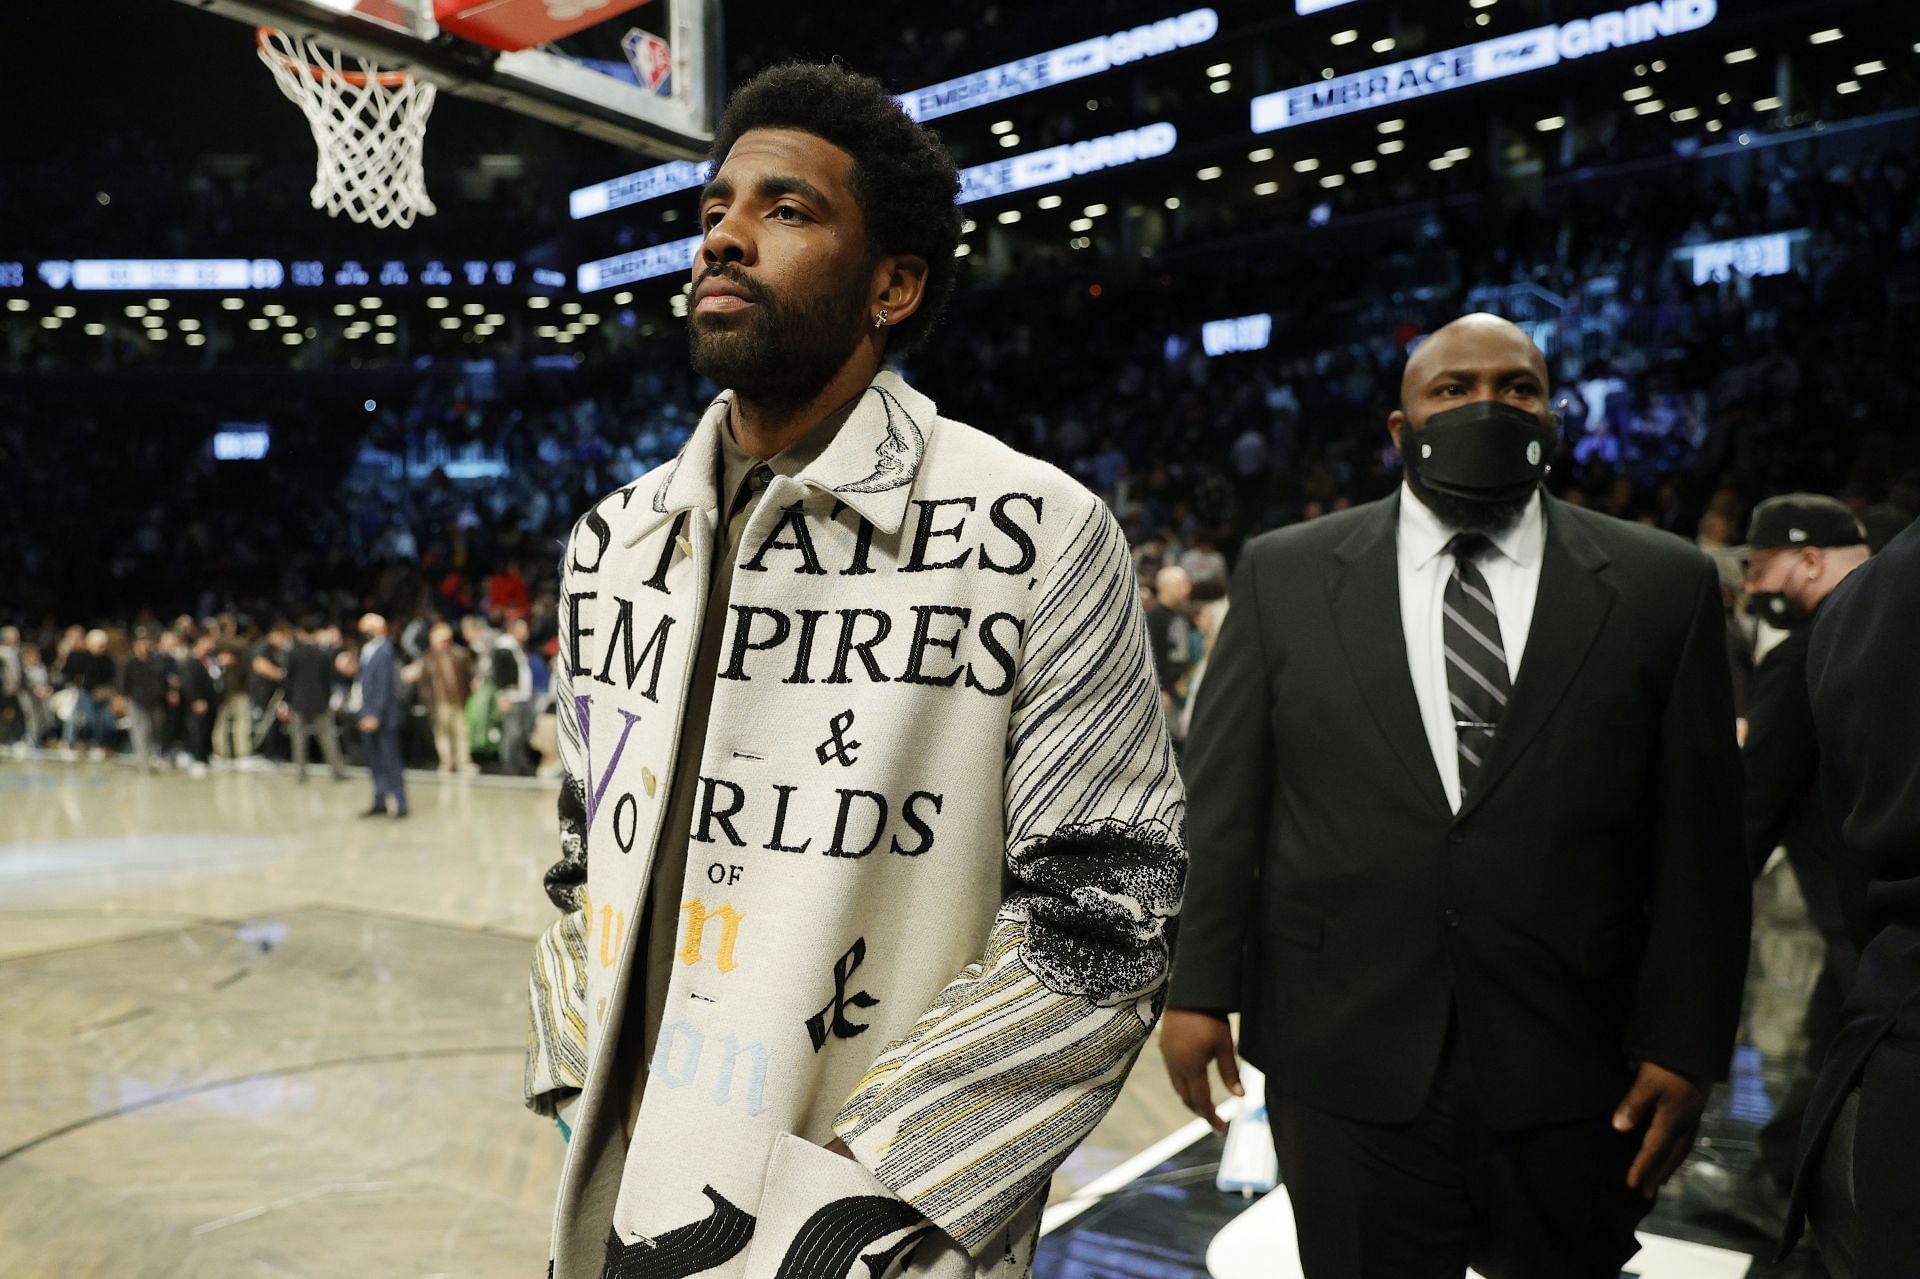 Kyrie Irving of the Brooklyn Nets attends the Nets&#039; game against the New York Knicks at Barclays Center on Sunday in the Brooklyn borough of New York City